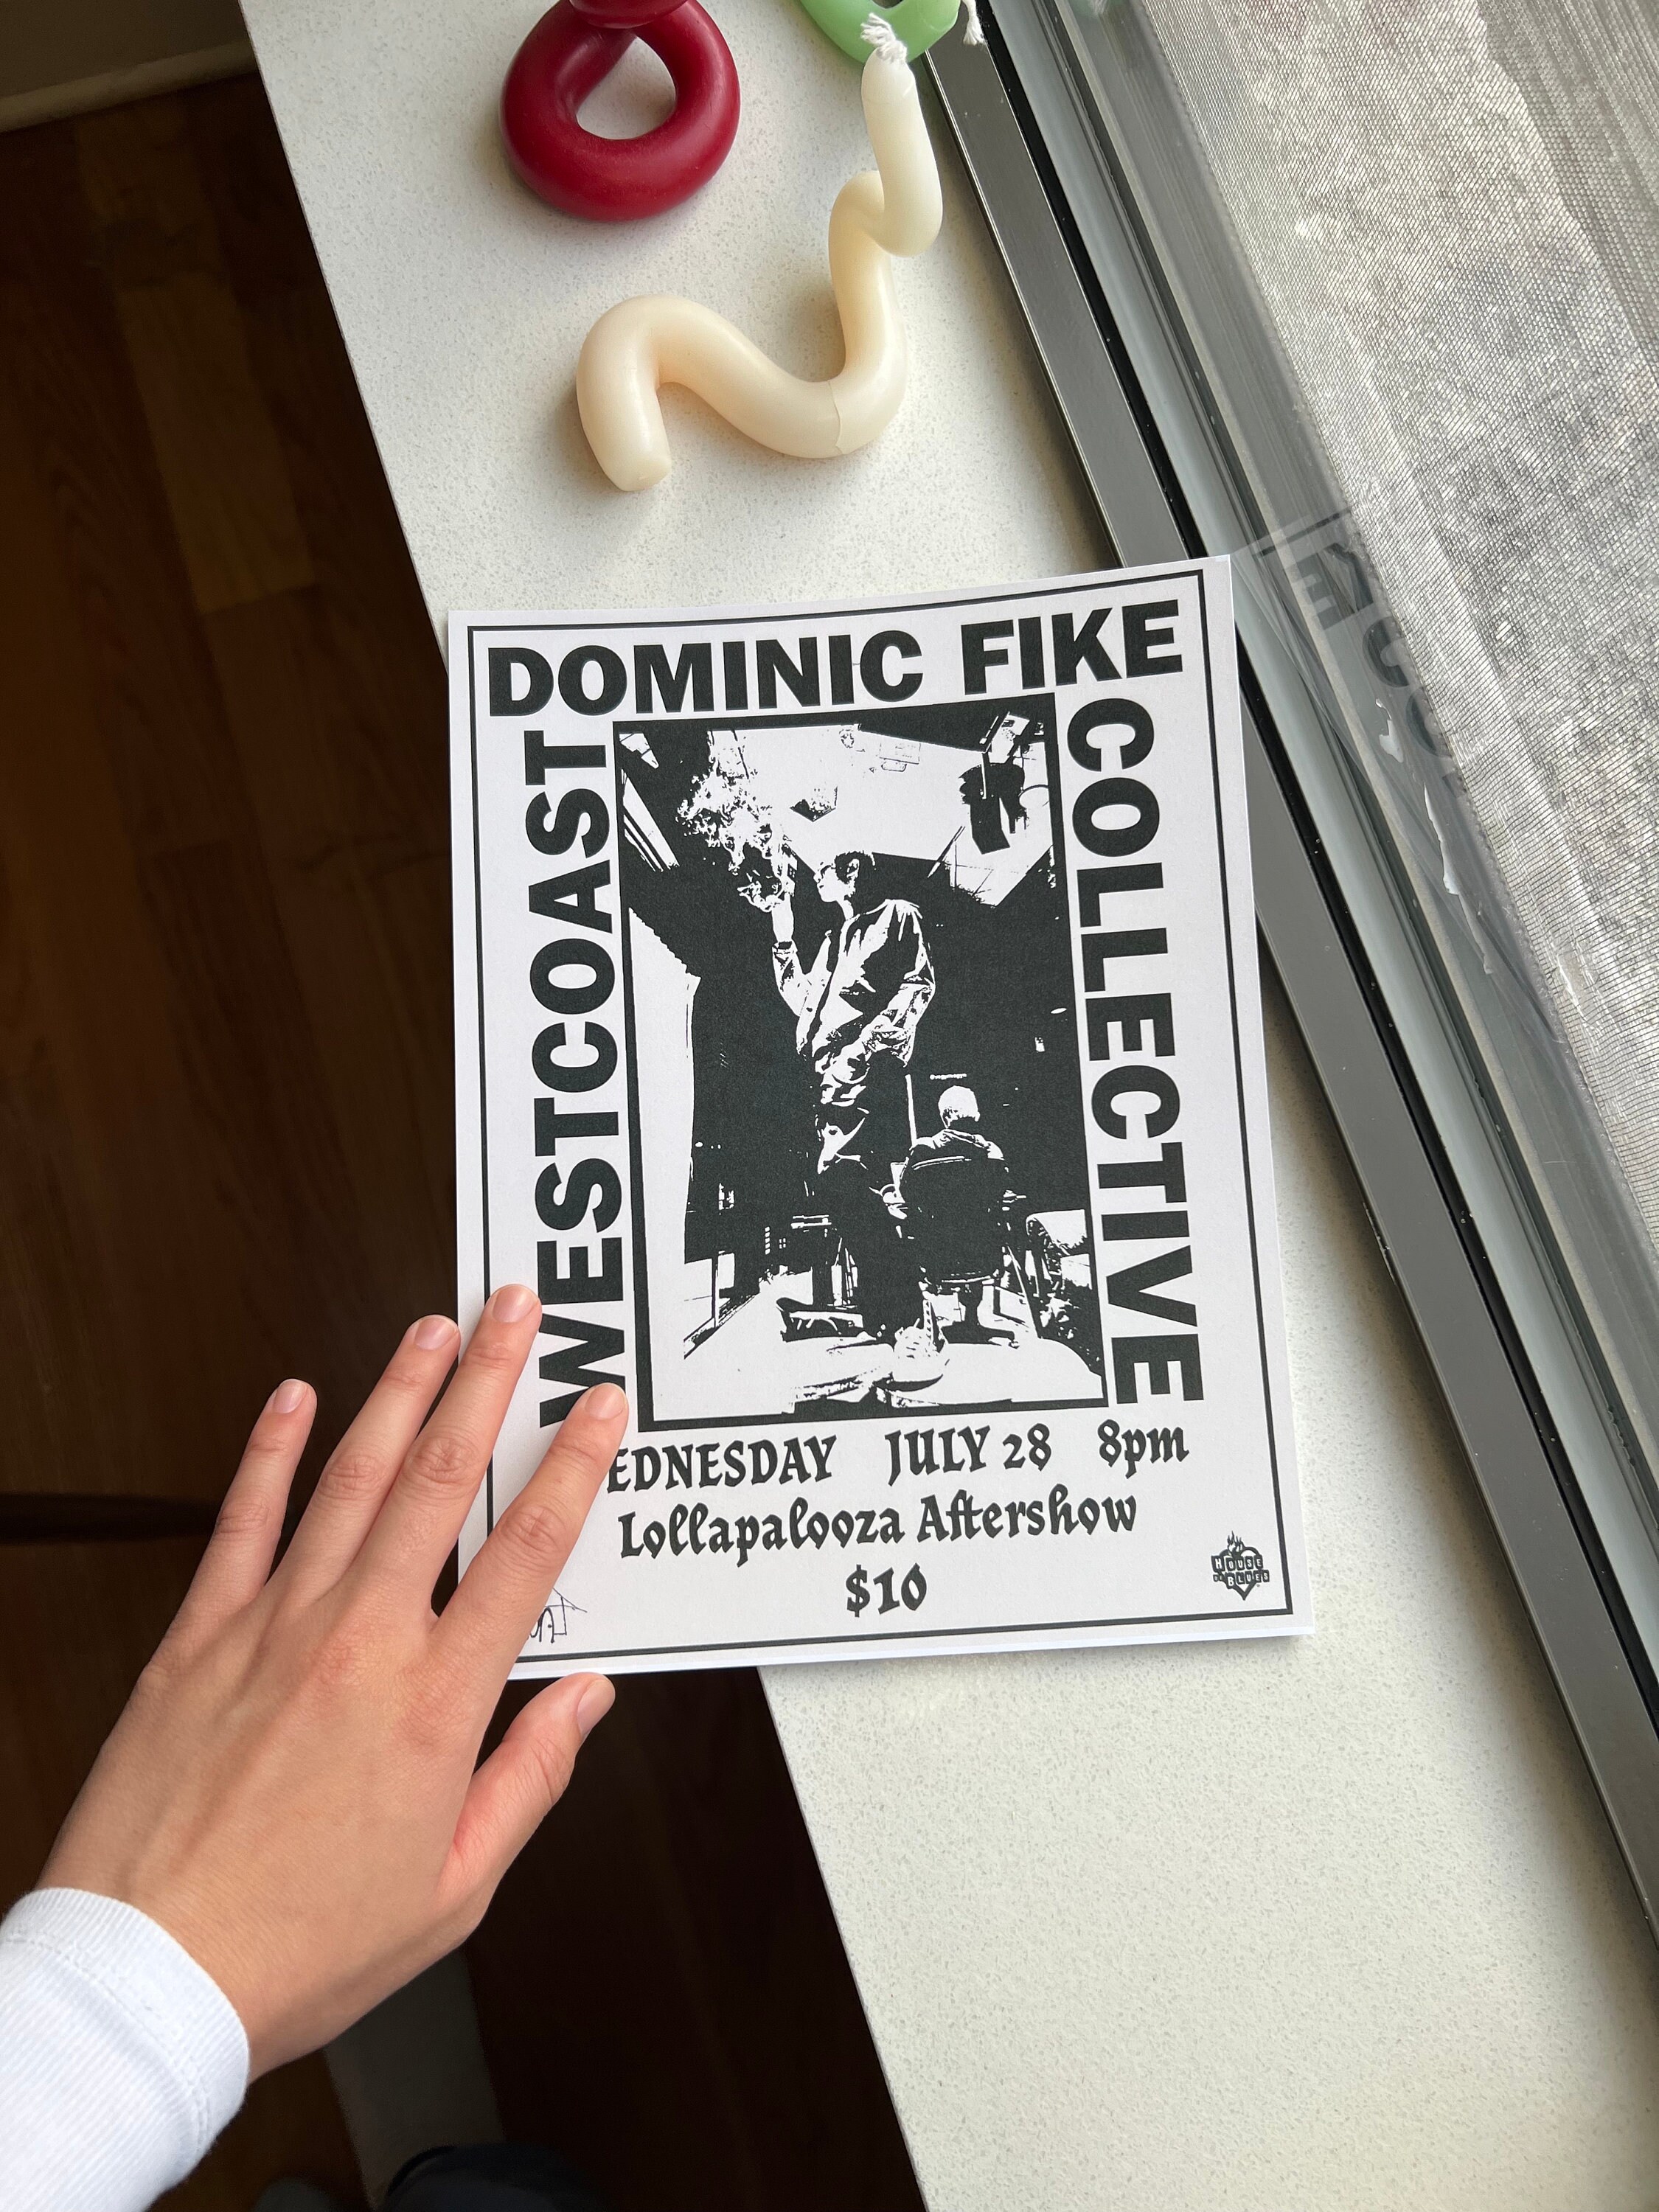 Dominic Fike Don't Forget About Me, Demos Poster Stickers sold by Chrissie  Mainsail, SKU 42413511